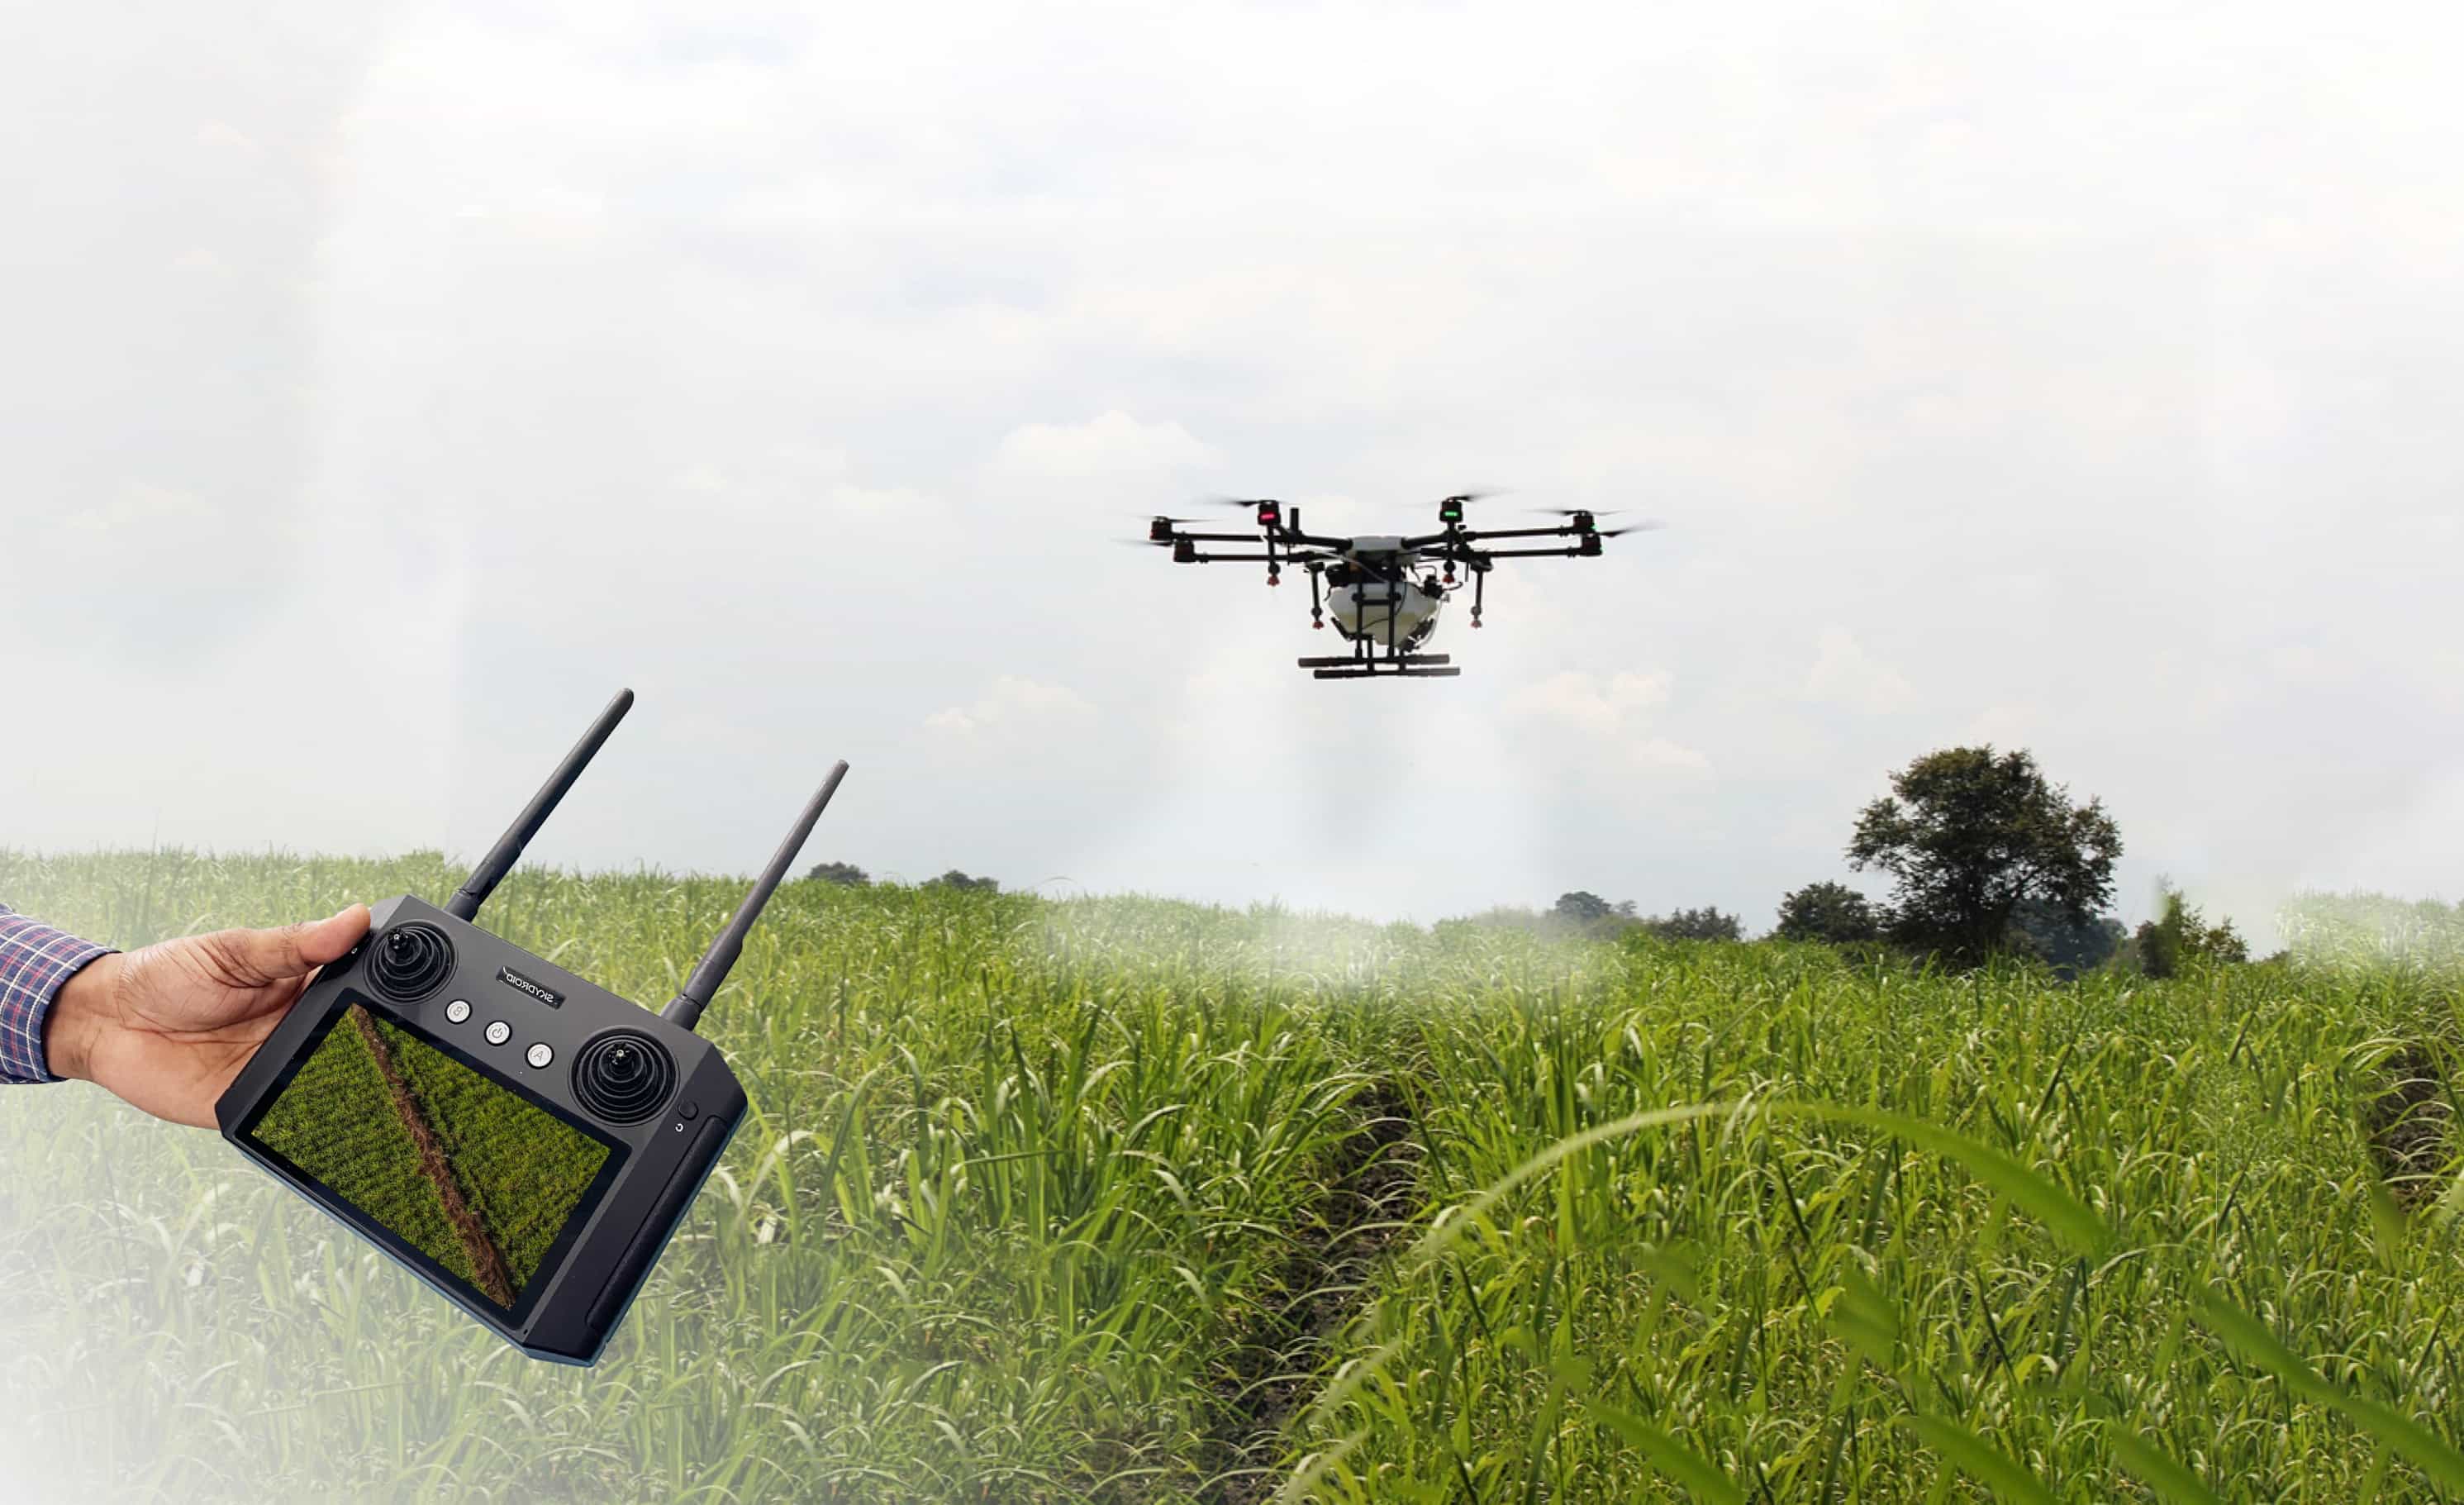 eqviv agriculture drone of remotely controlled system